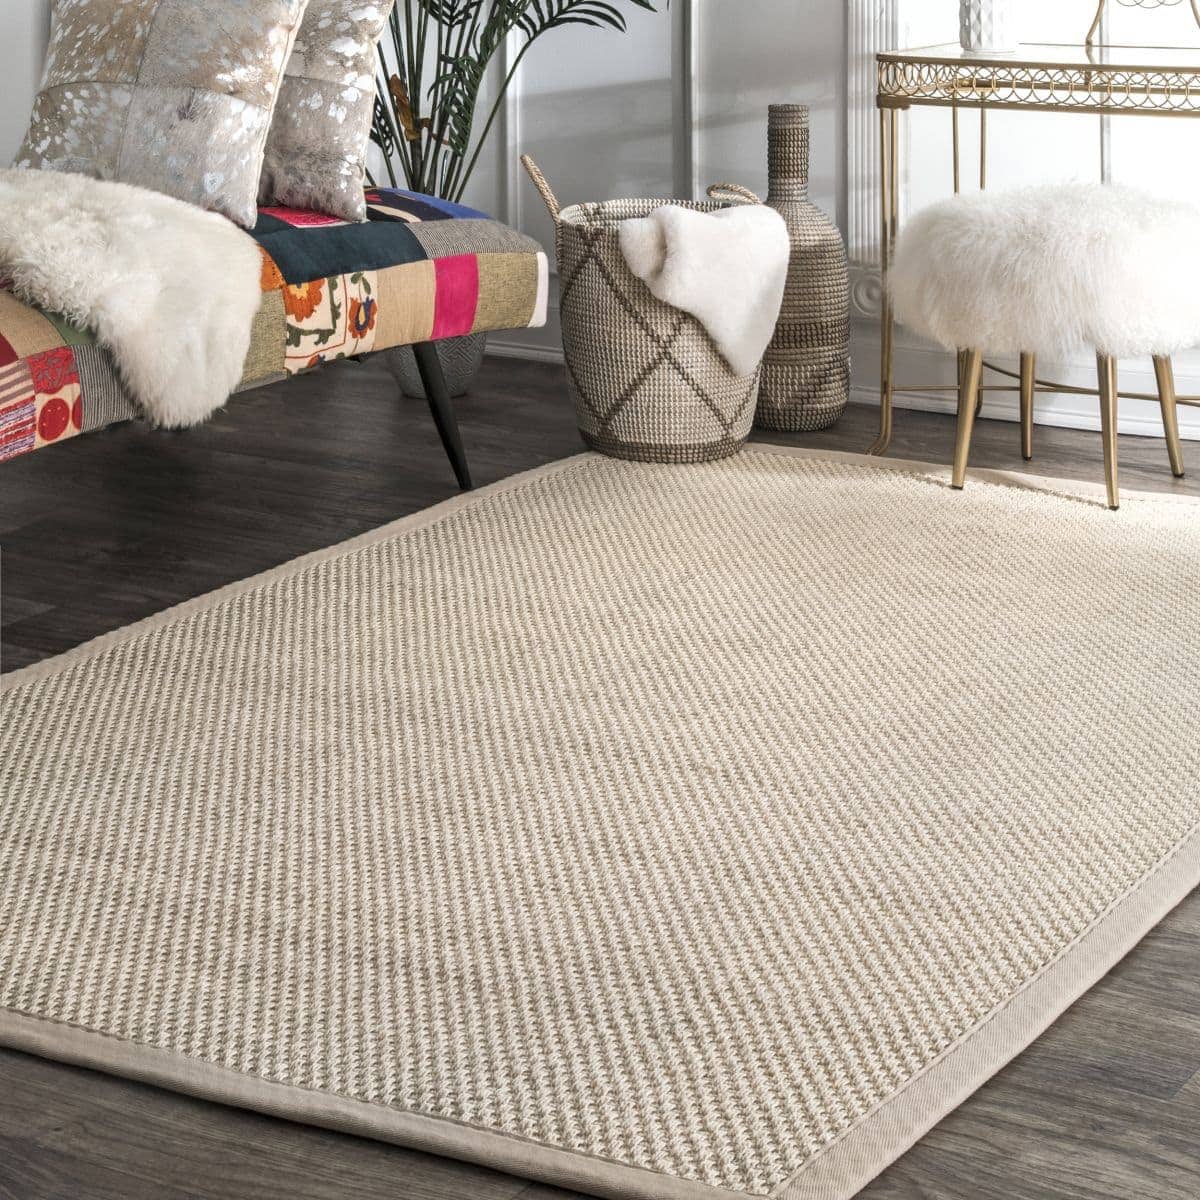 24"x72" Great Throw Rug for High Traffic Rag Rug Runner in Sage Green Cotton 